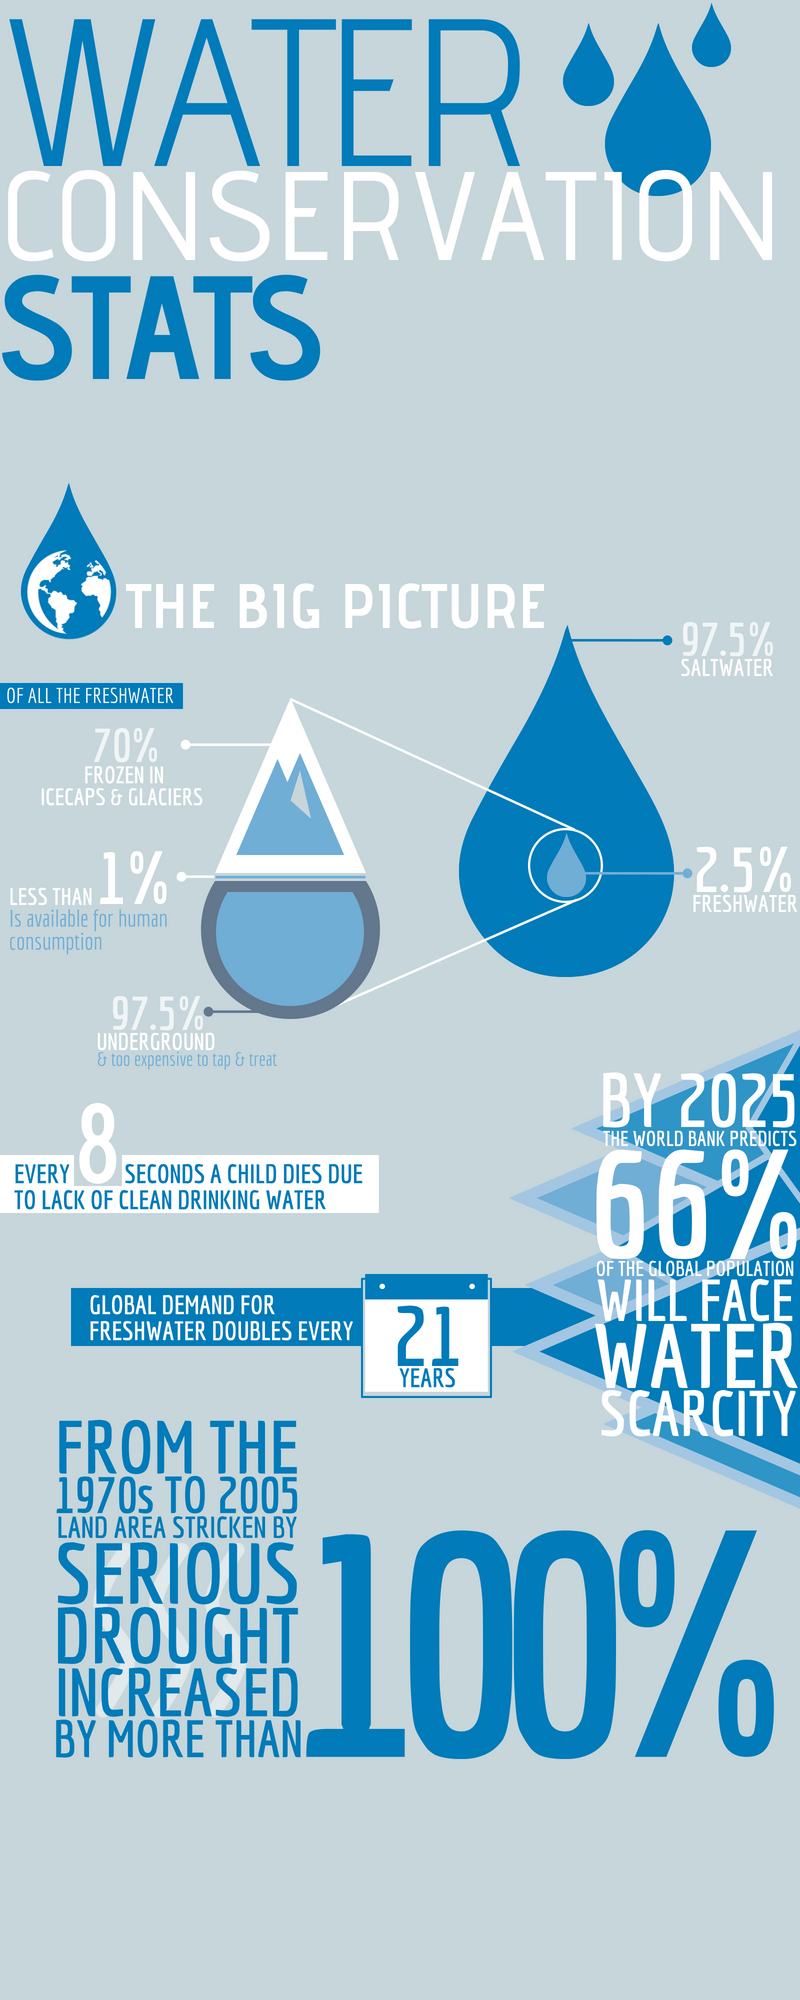 Water Conservation Stats for Your Irrigation Business (1)